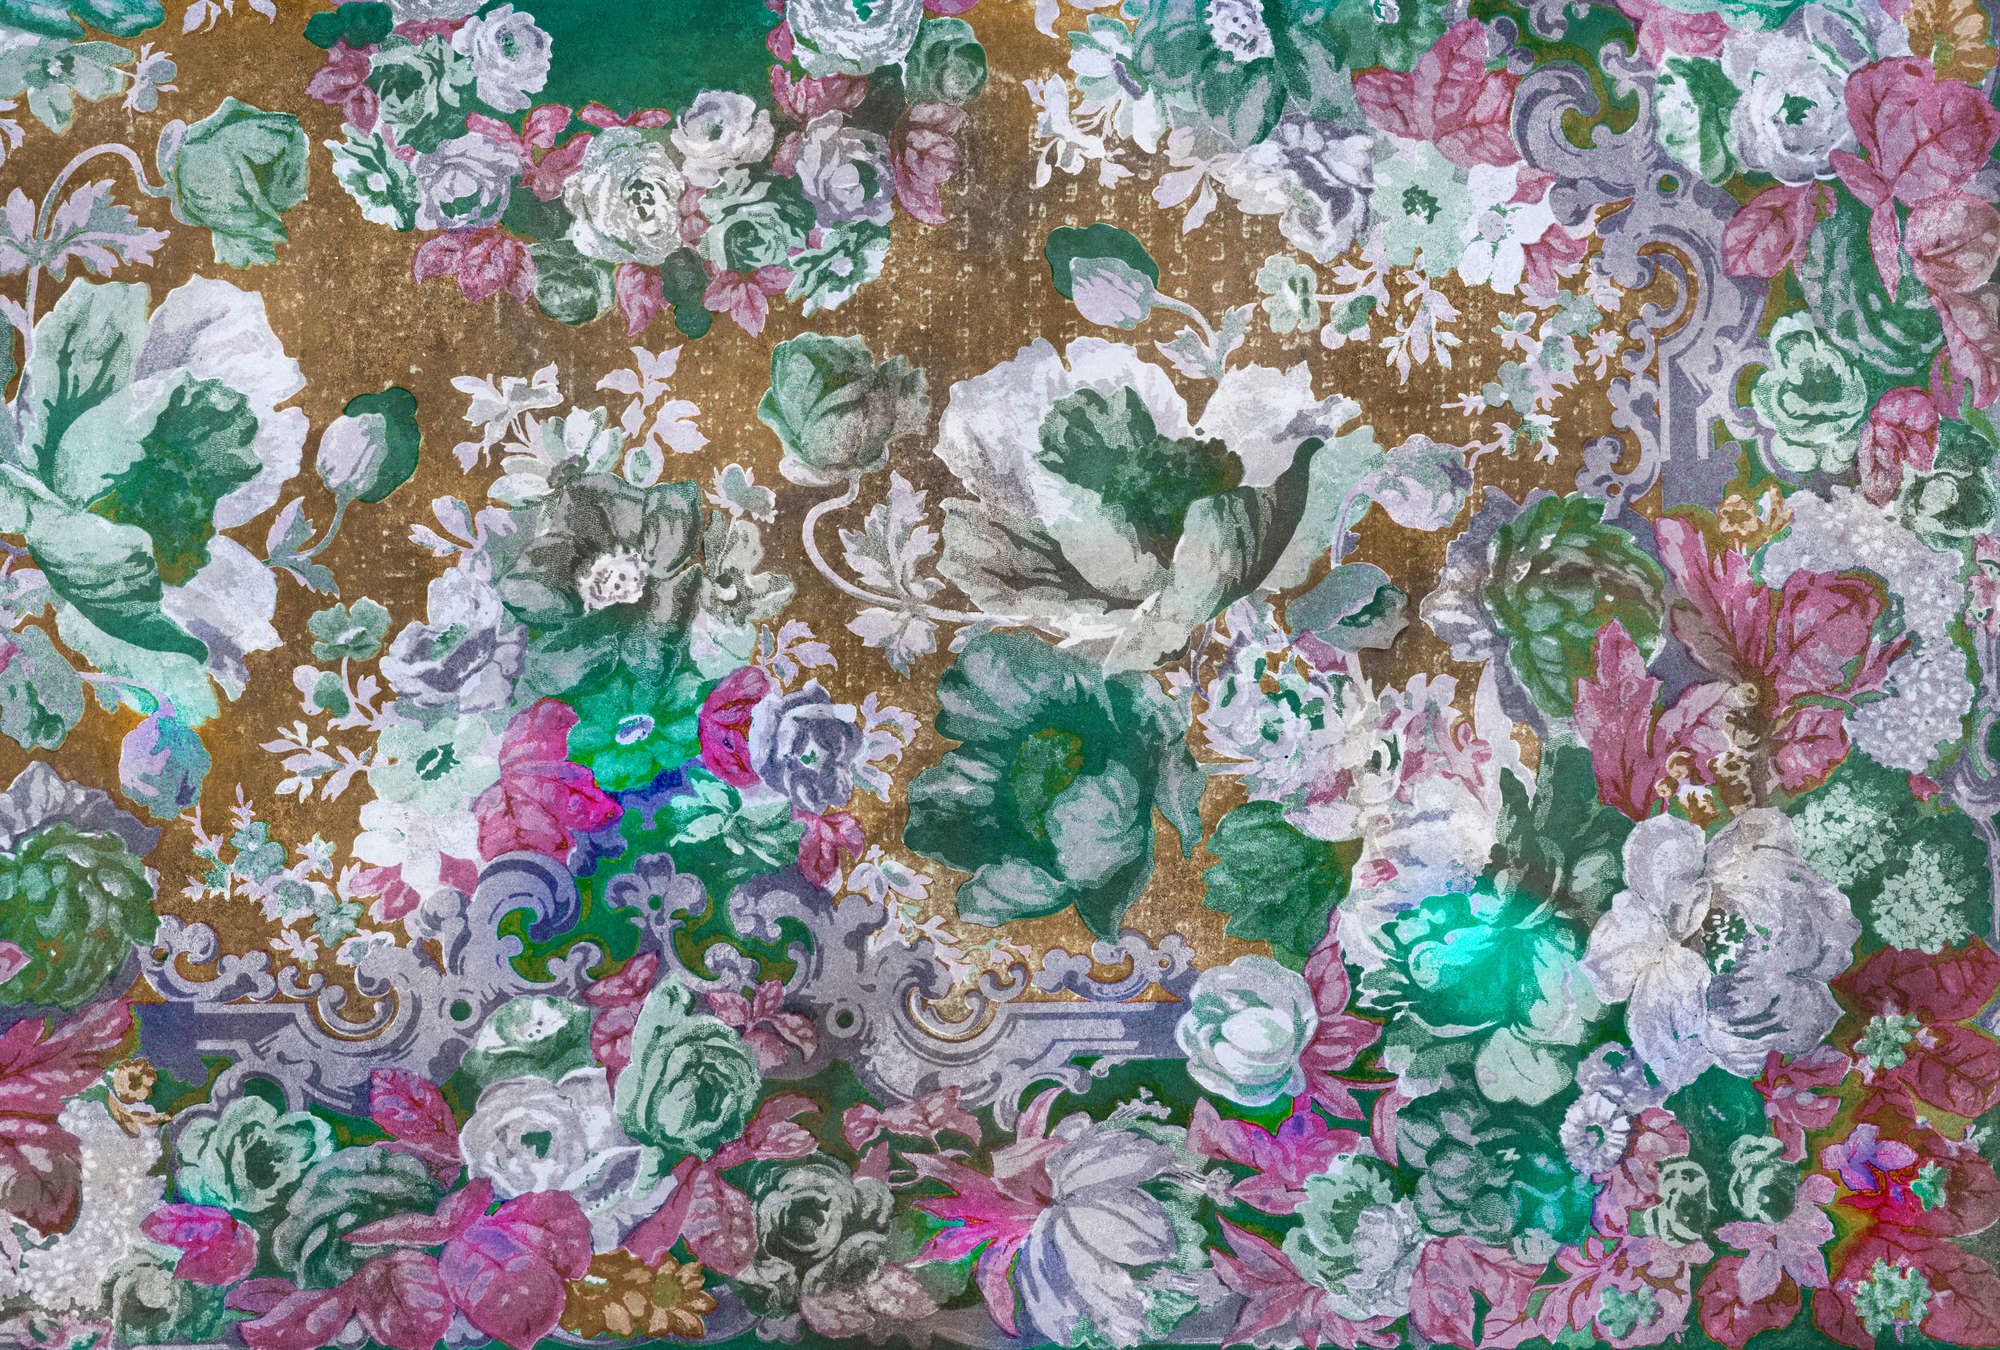             Photo wallpaper »carmente 1« - Classic style floral pattern in front of vintage plaster texture - Colourful | matt, smooth non-woven
        